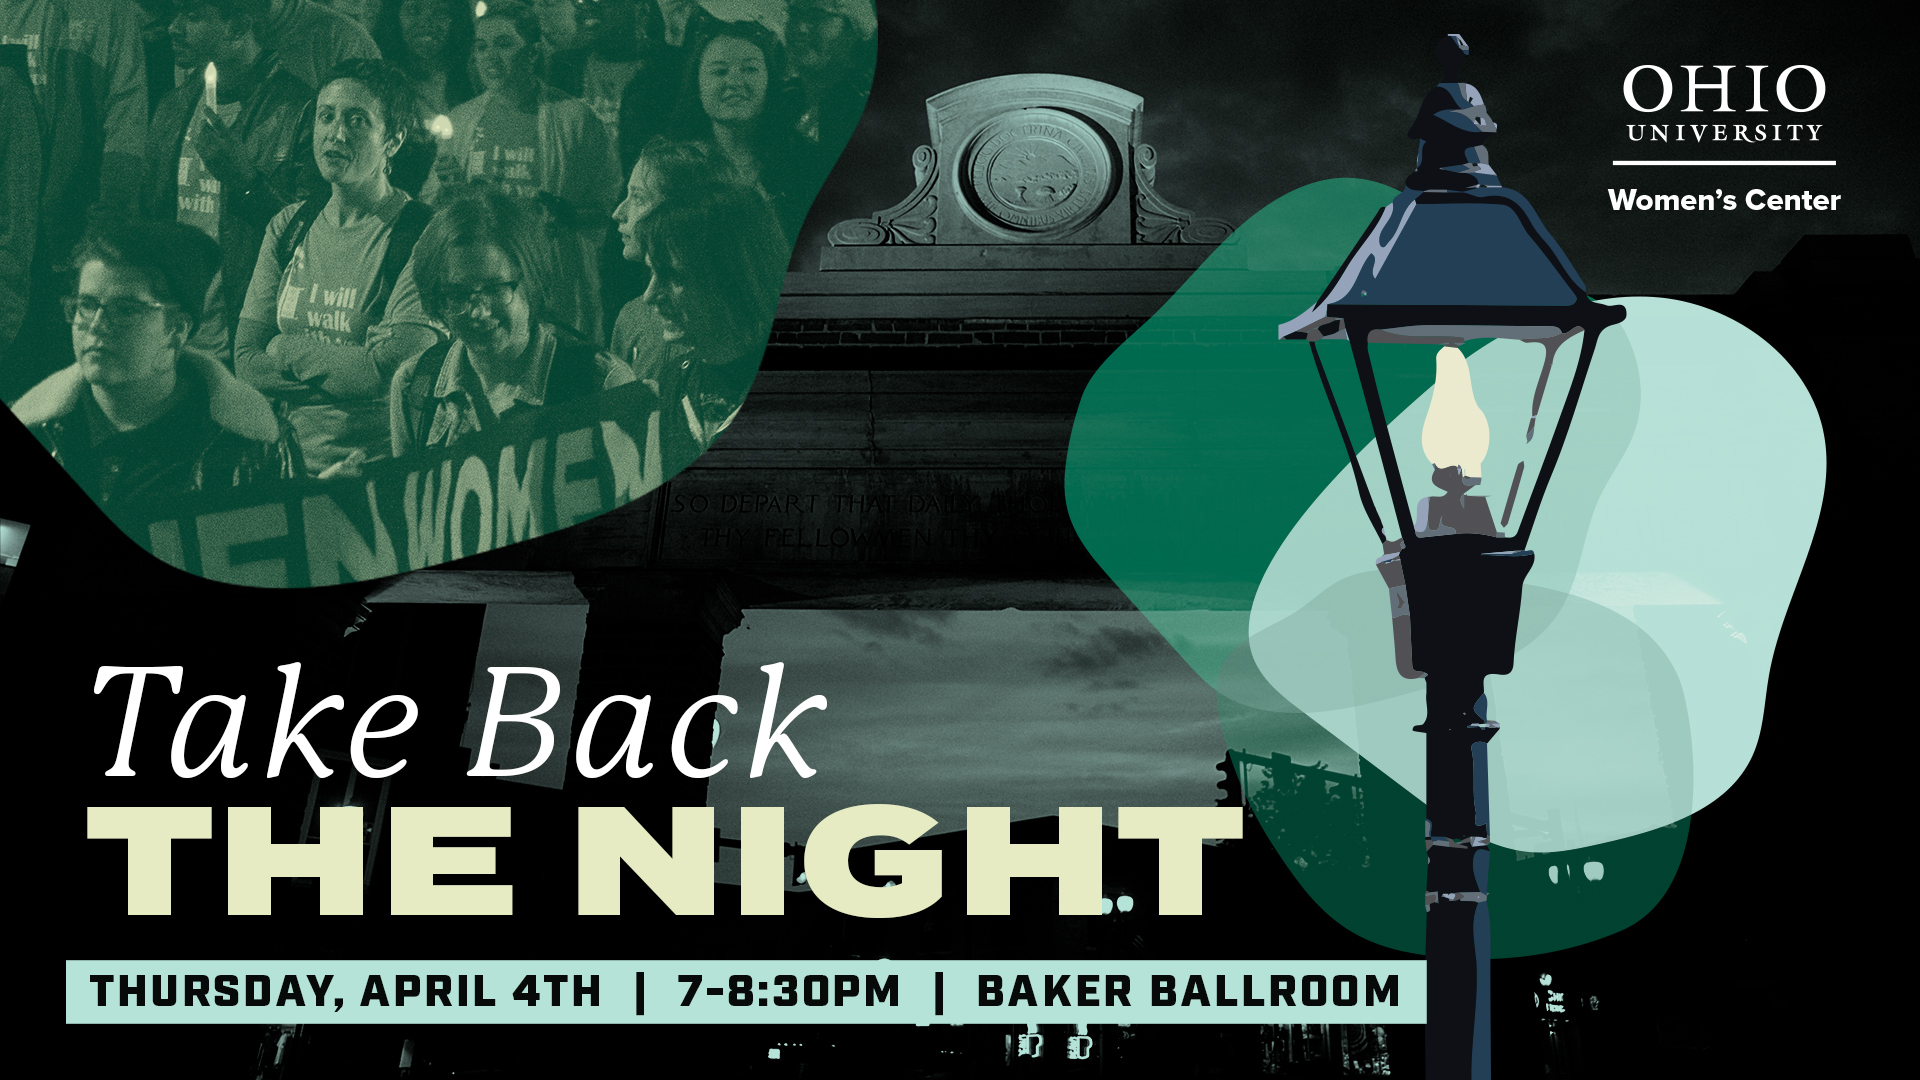 Decorative Graphic with text "Take Back The Night" "Thursday, April 4th. 7-8:30PM. Baker Ballroom"